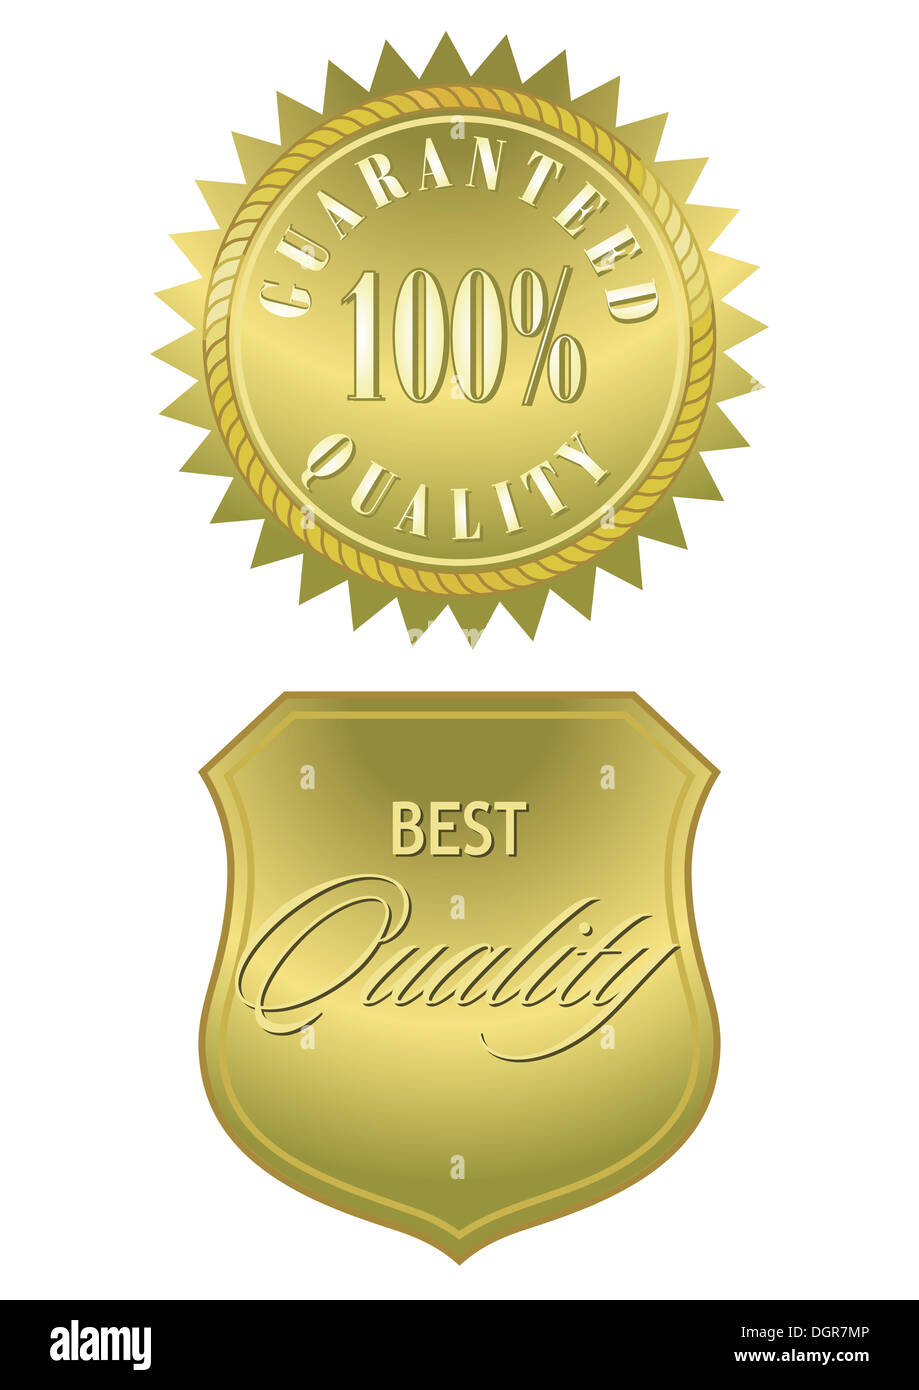 Quality Certificate Stock Photo